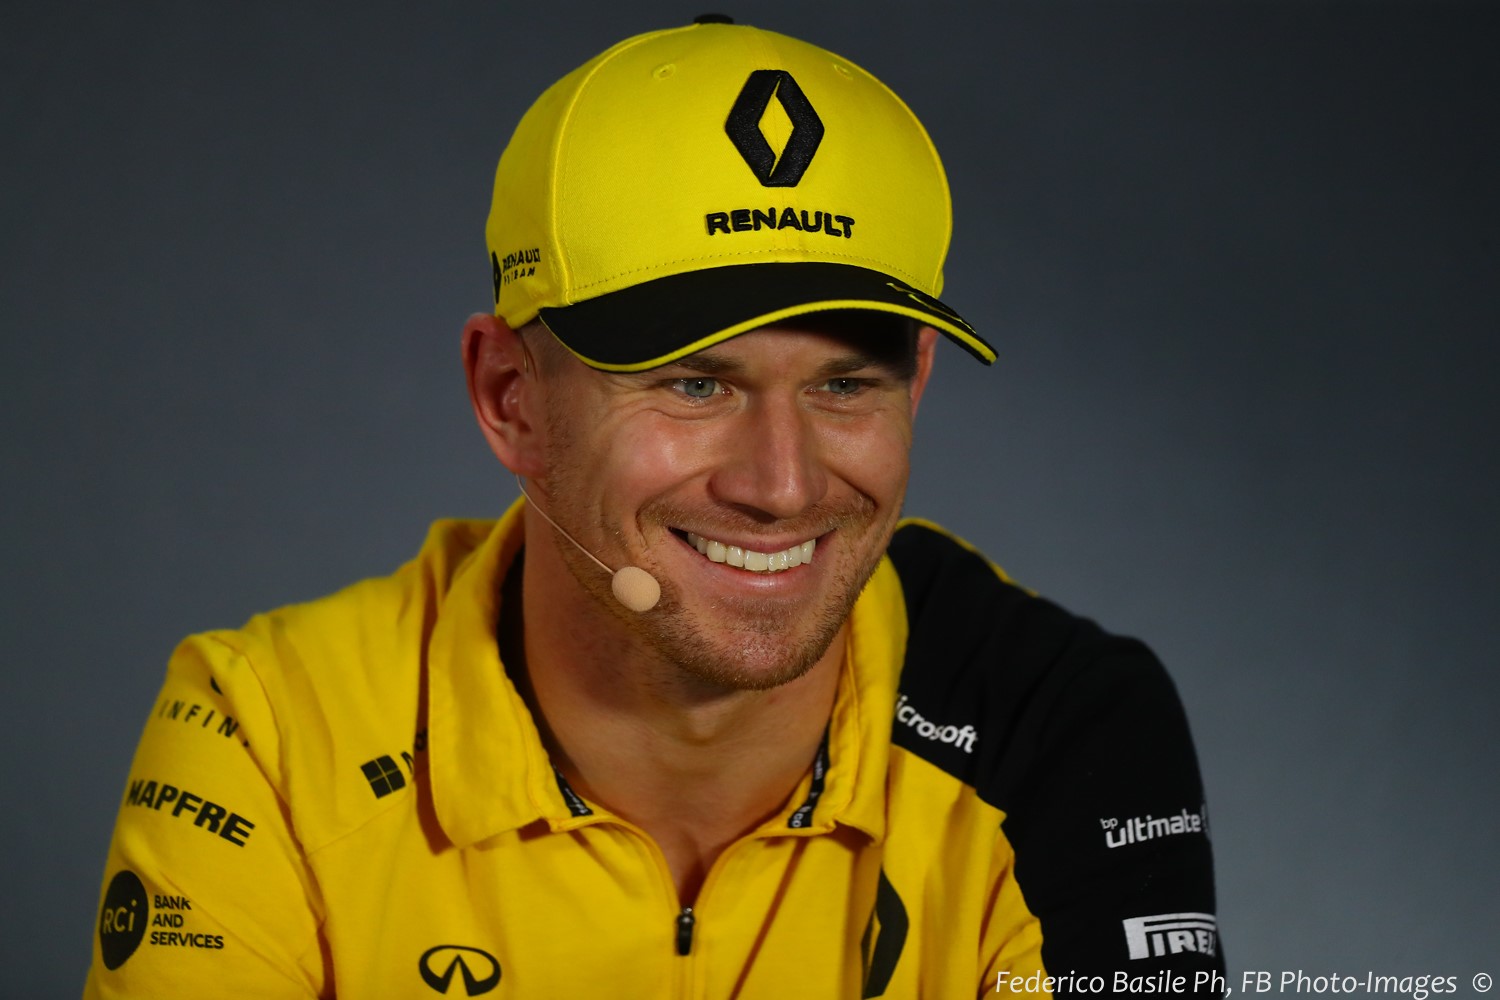 The AR1.com rumor page has Hulkenberg going to Alfa Romeo in 2020, not Haas